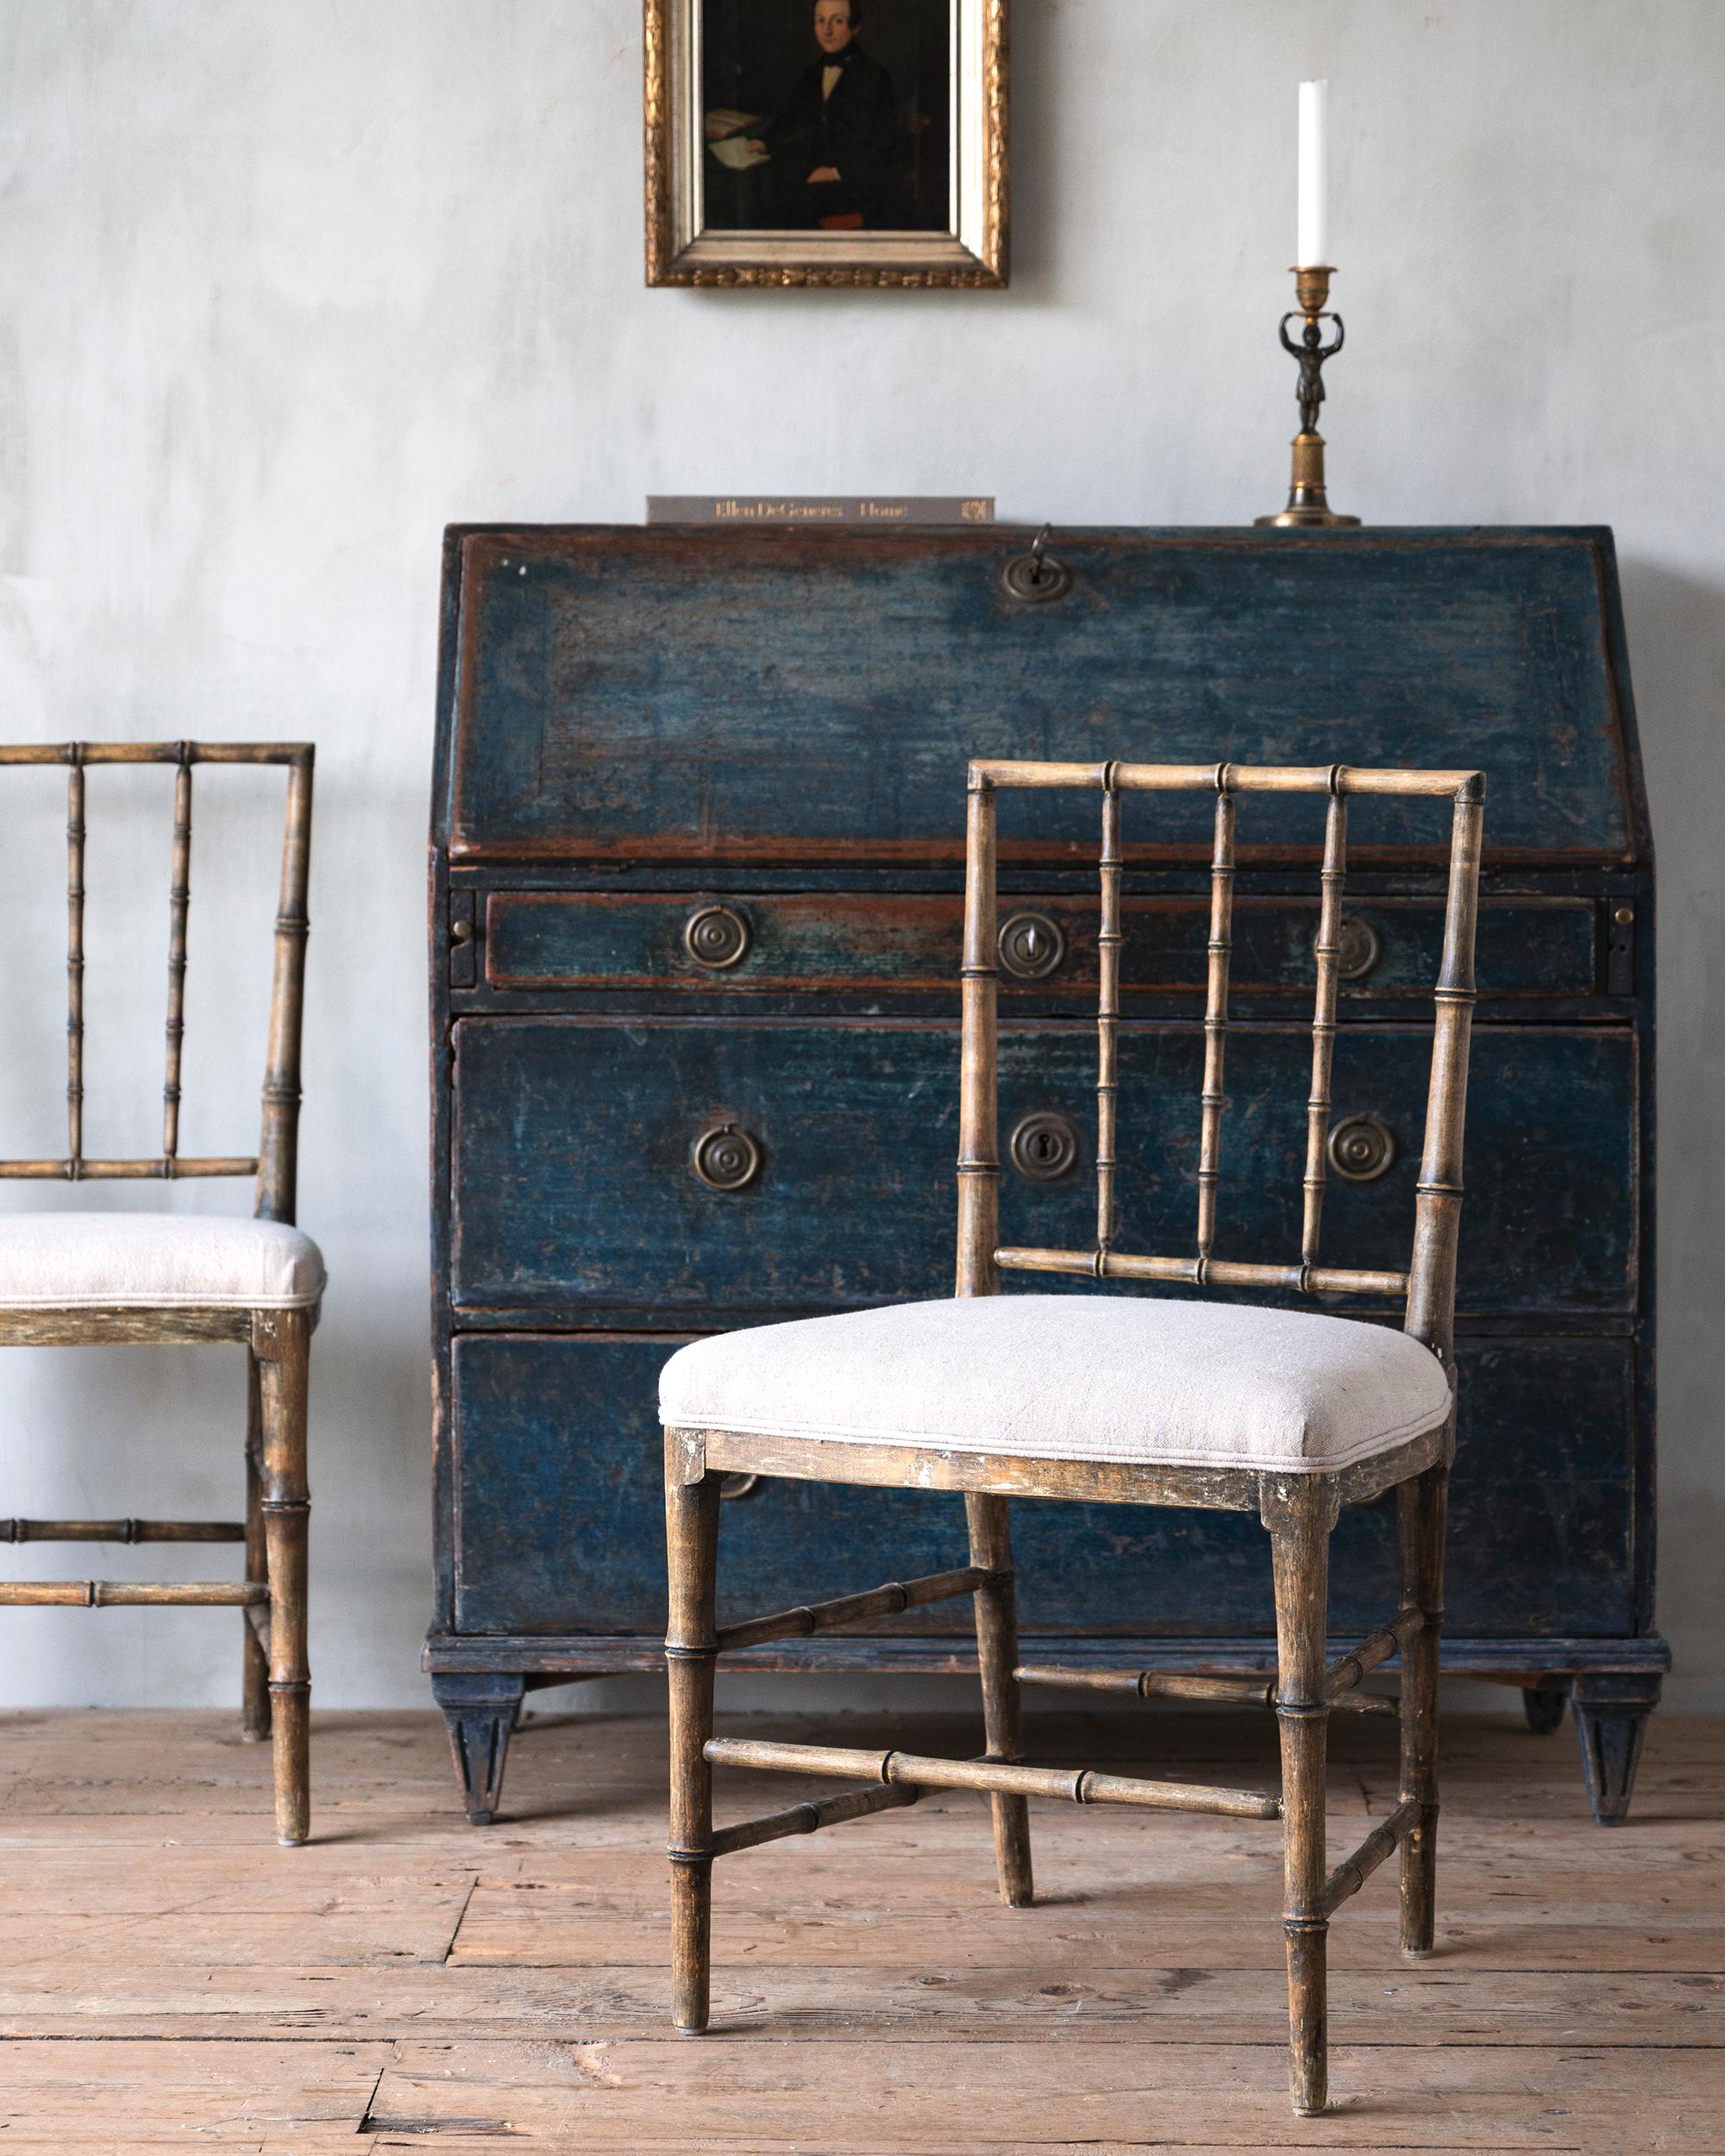 Rare pair of early 19th century Gustavian faux bamboo chairs in their original finish. Ca 1810 Stockholm, Sweden. 

The chairs are attributed to Ephraim Sthal. Supplier to the Royal Court and one of the most sophisticated and inventive makers of his